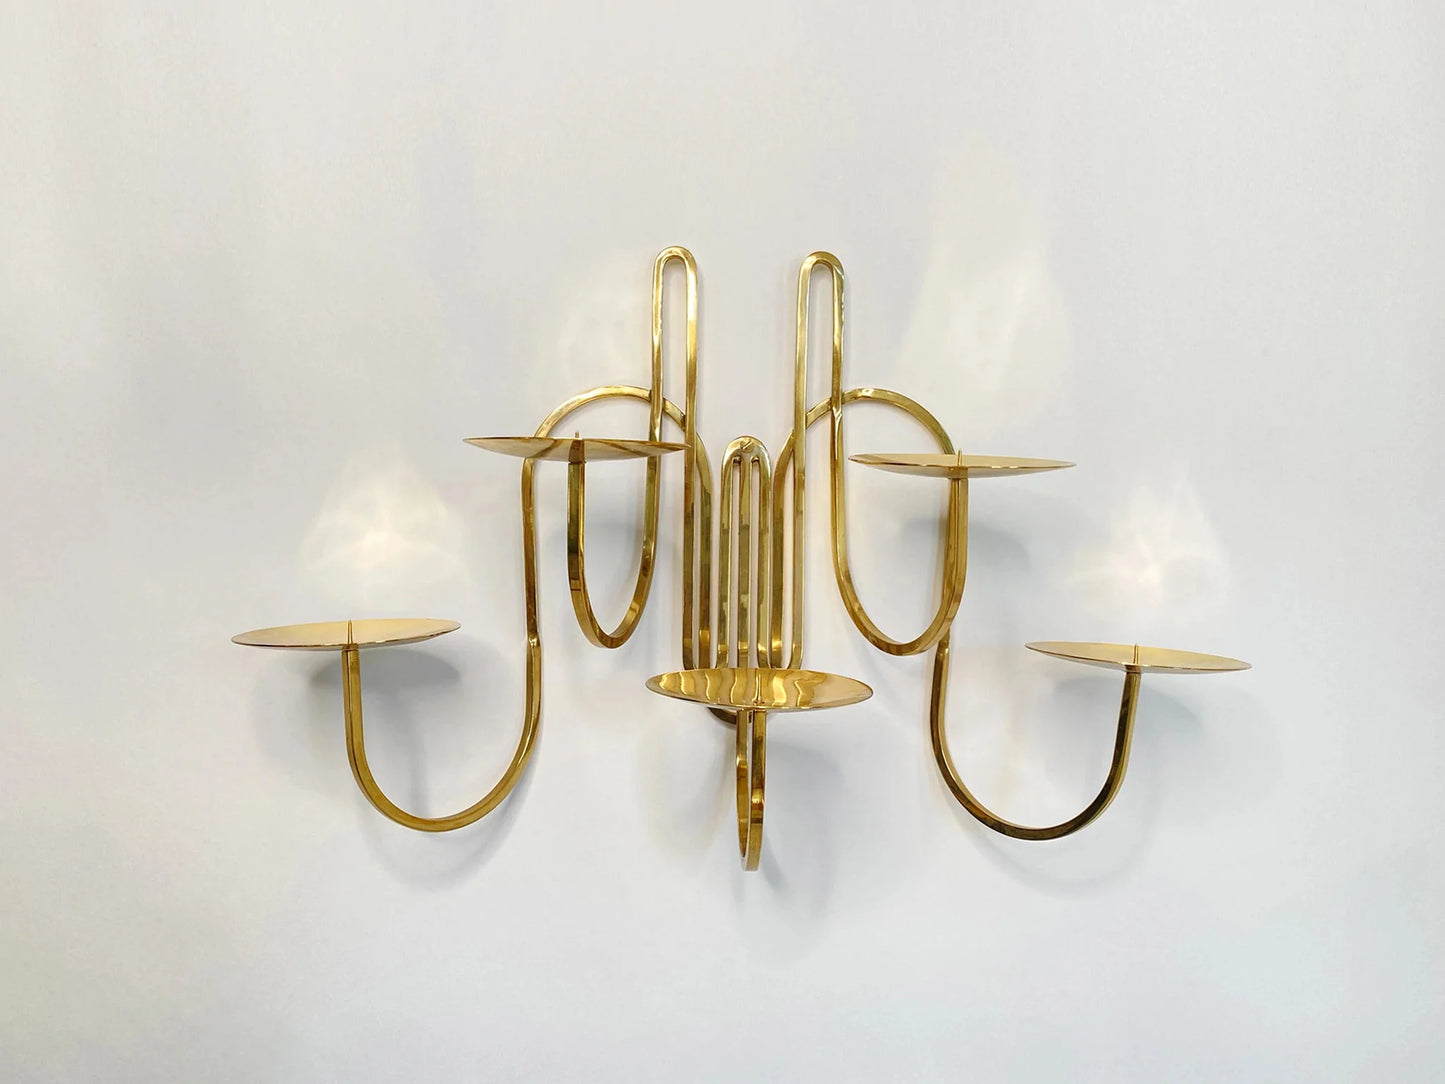 Five Arm Brass Candle Sconce